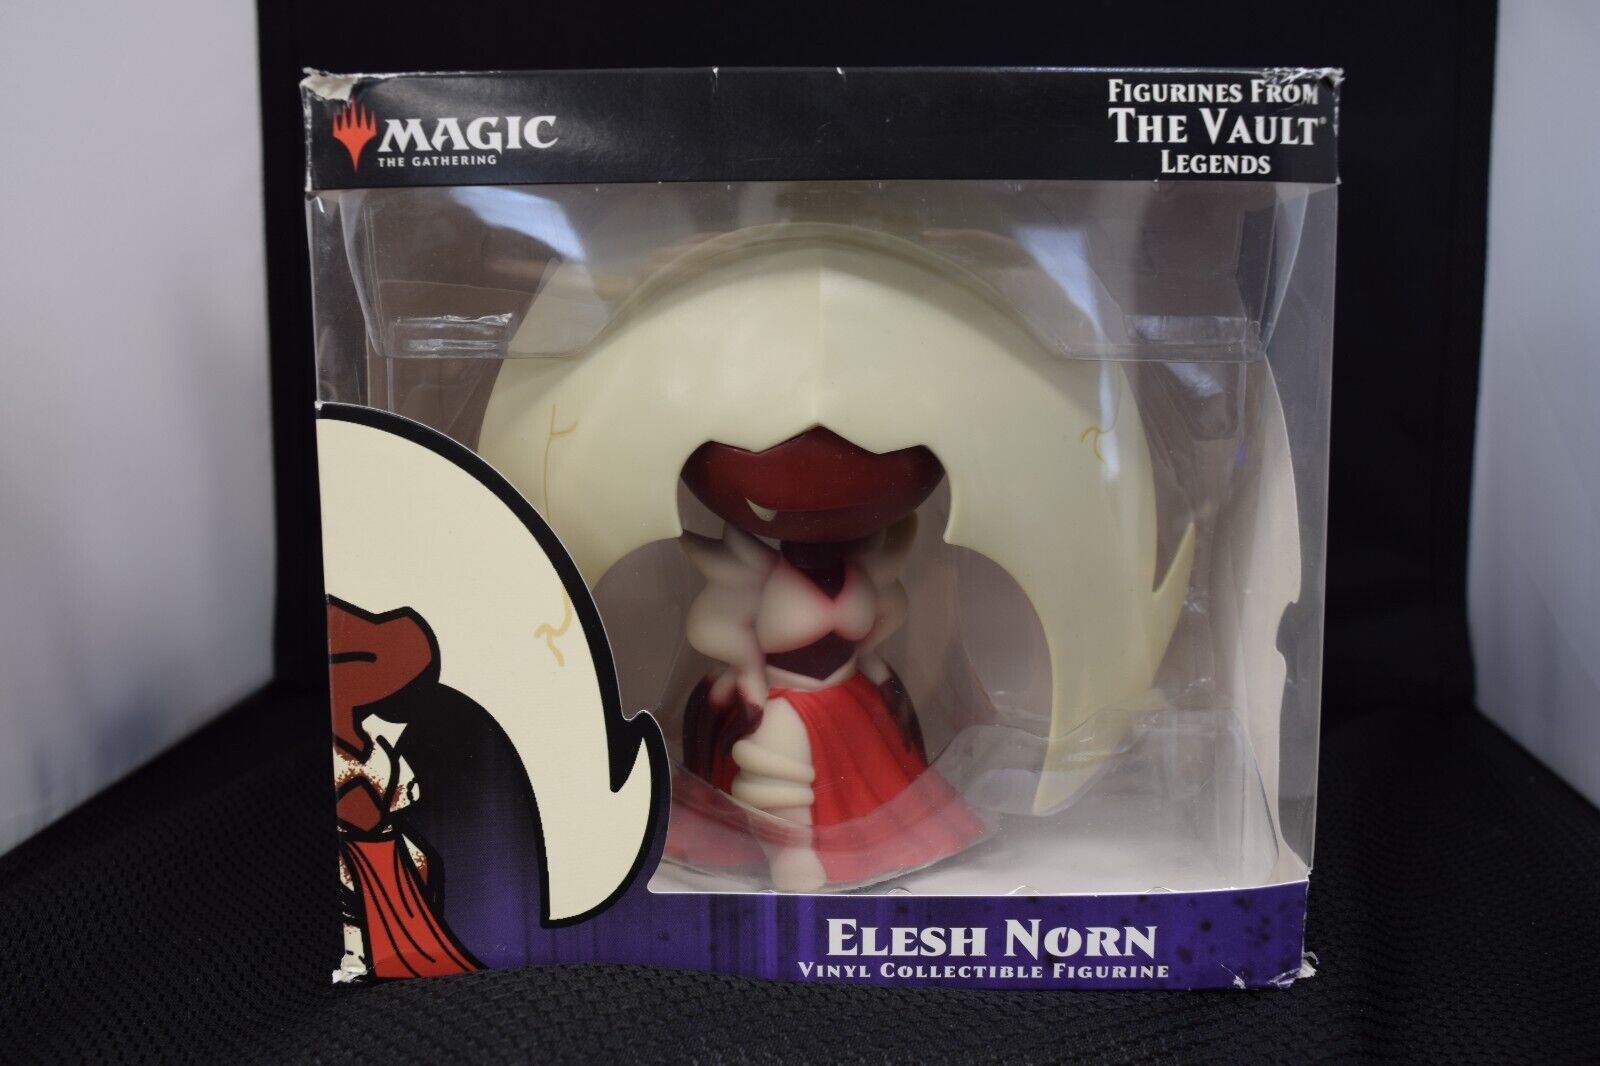 Figurines from the Vault Legends: Elesh Norn for Magic: The Gathering